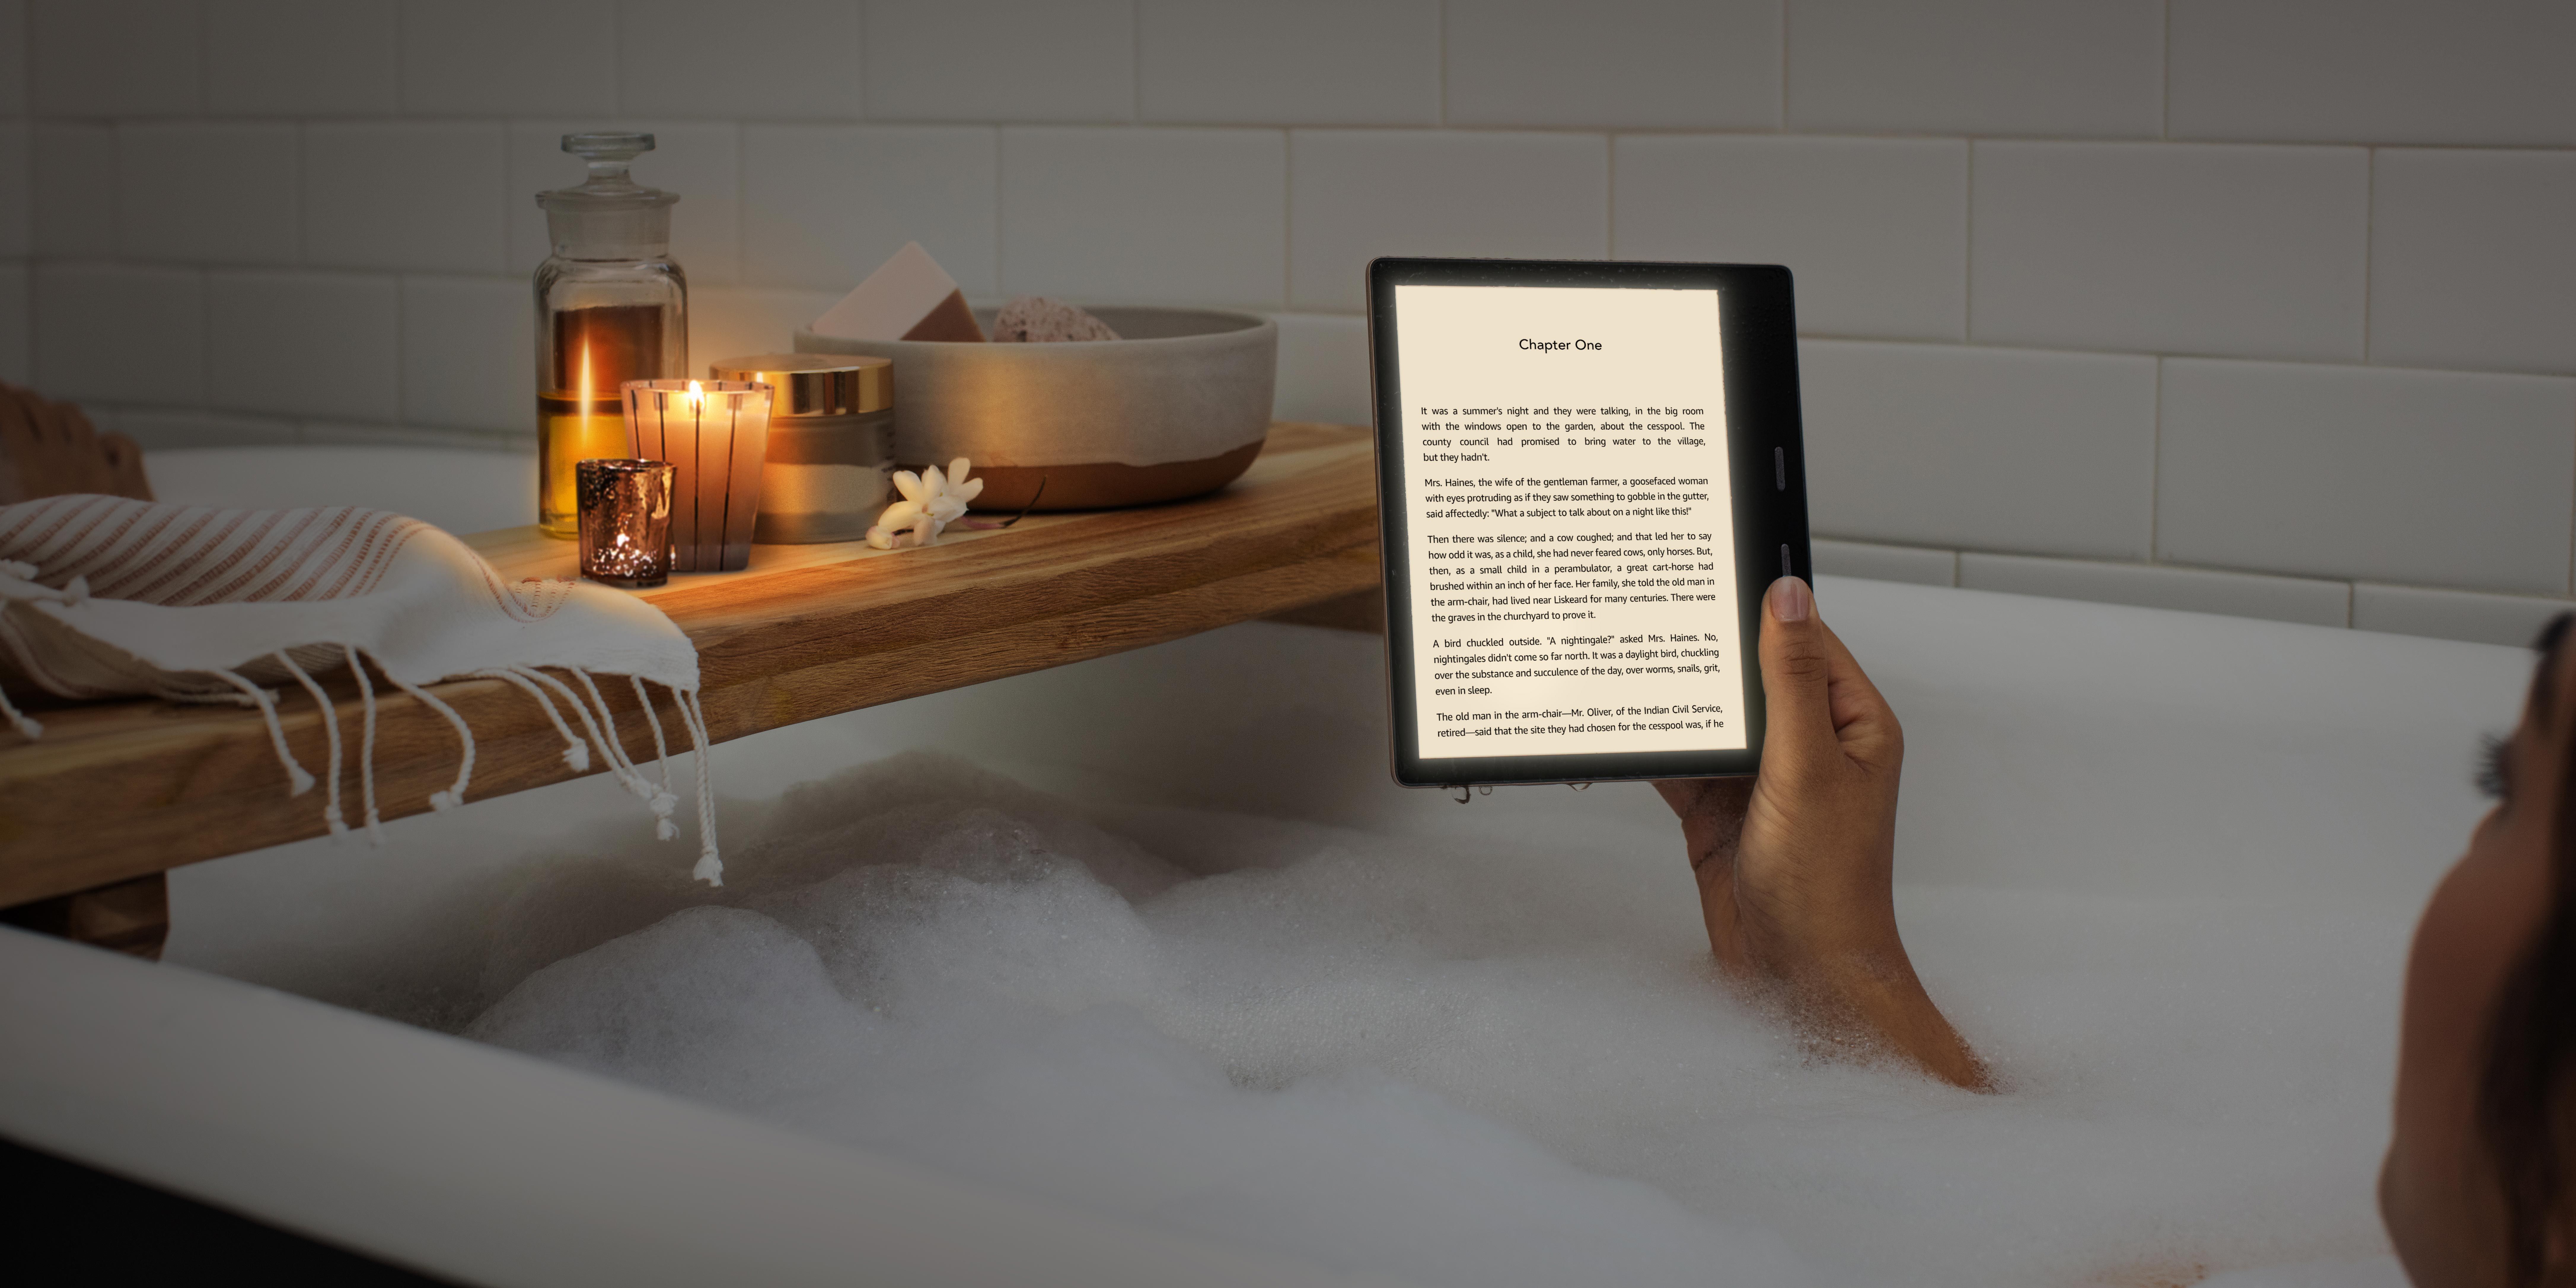 New Amazon S Kindle Reduces Blue Light When Reading At Night